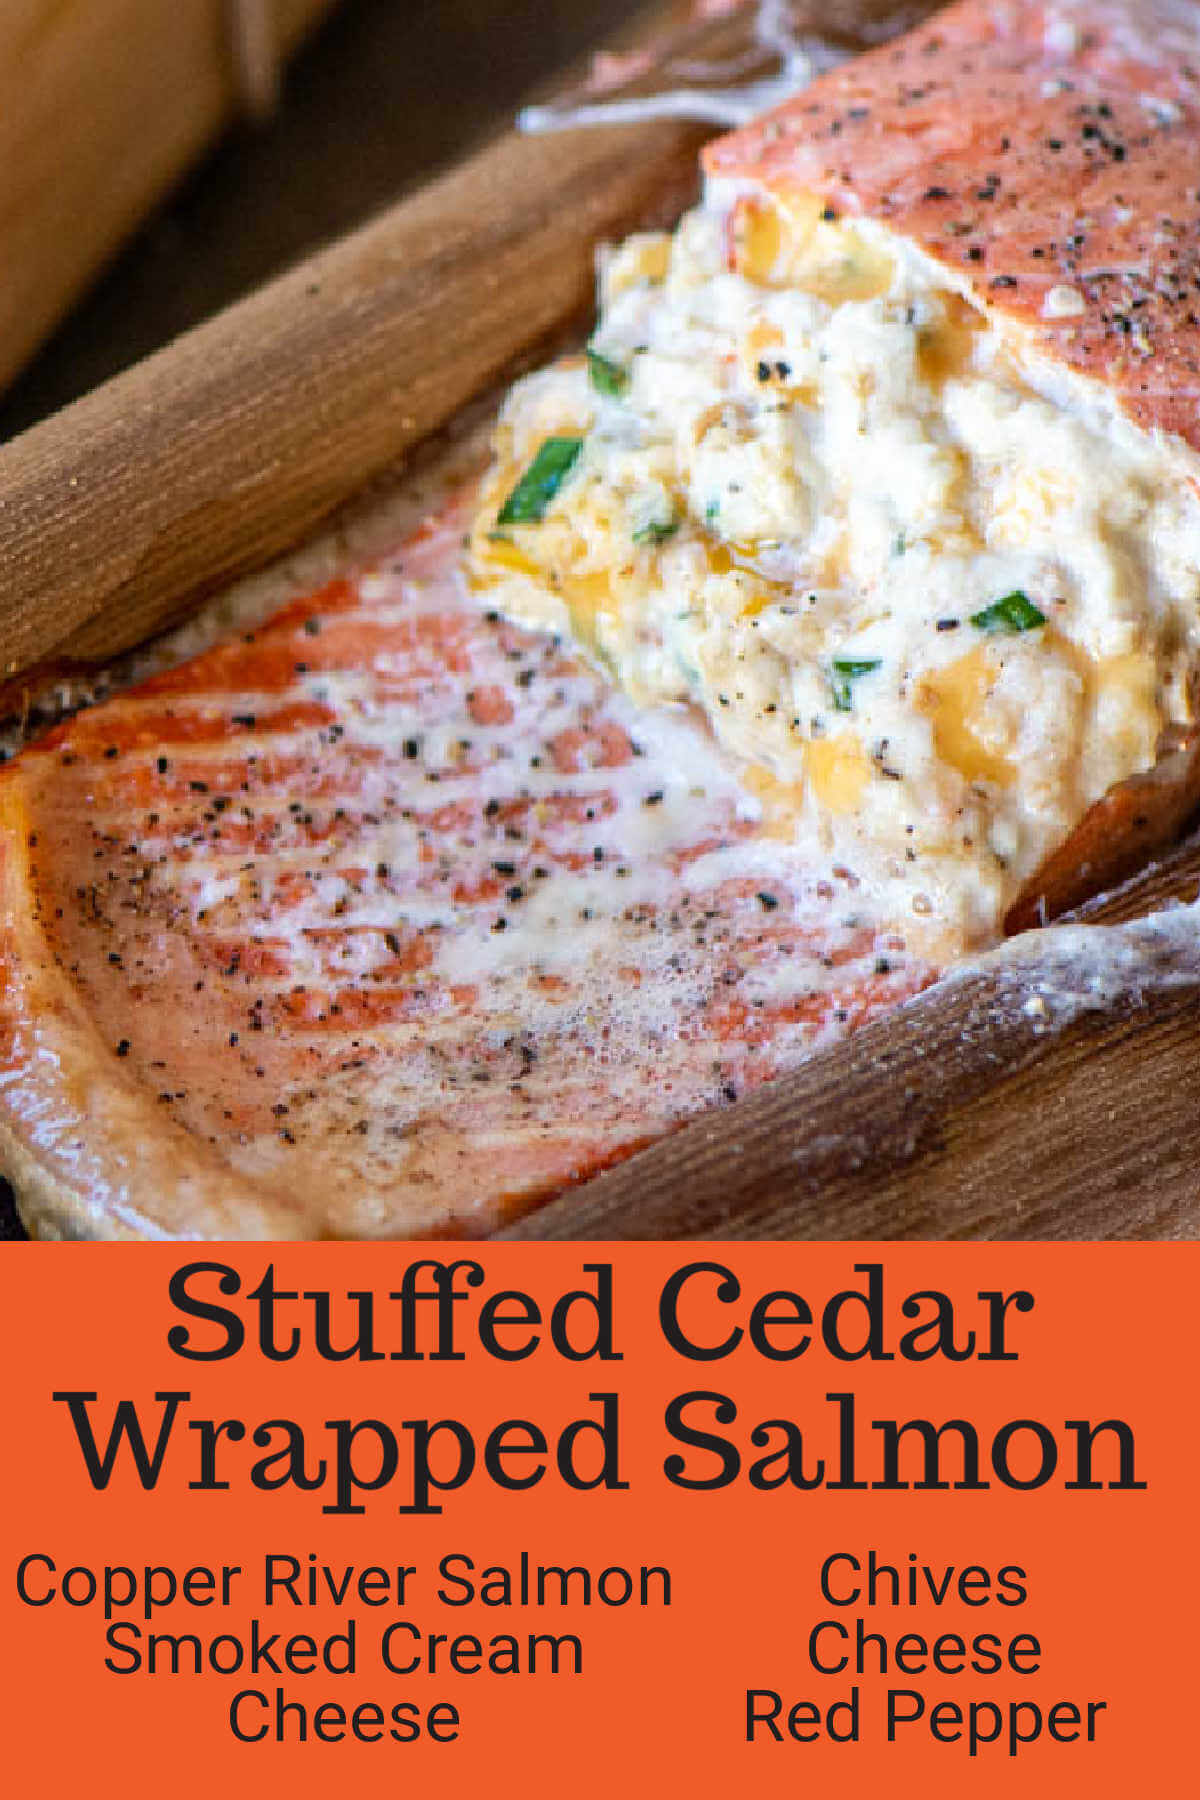 Grilled Stuffed Copper River Salmon